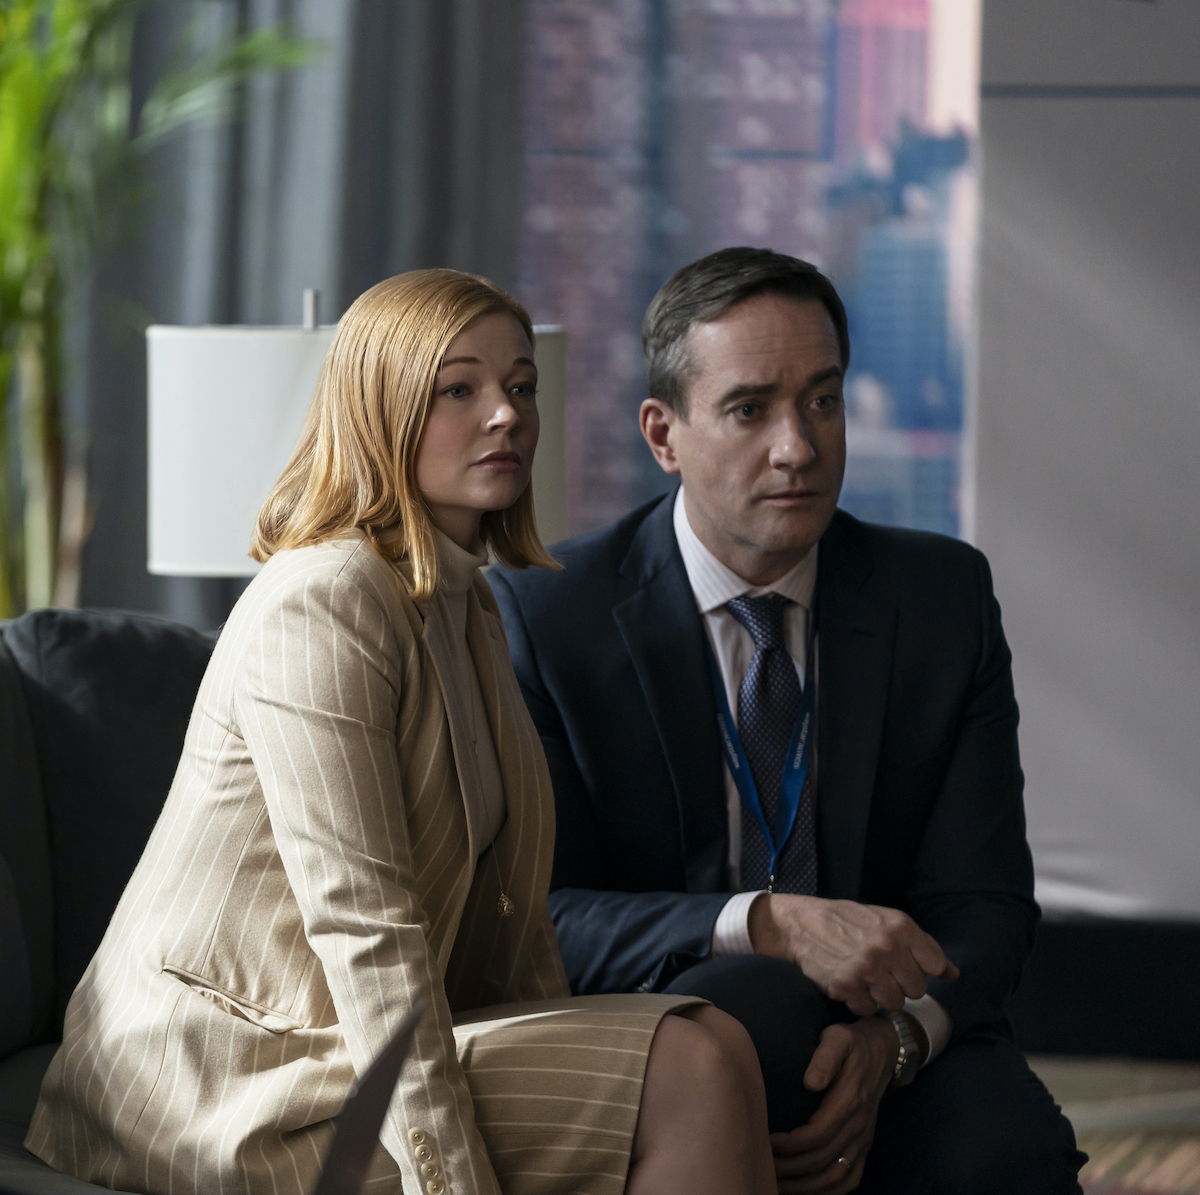 'Succession': Shiv Roy (Sarah Snook) and Tom (Matthew Macfadyen) sit on a couch together